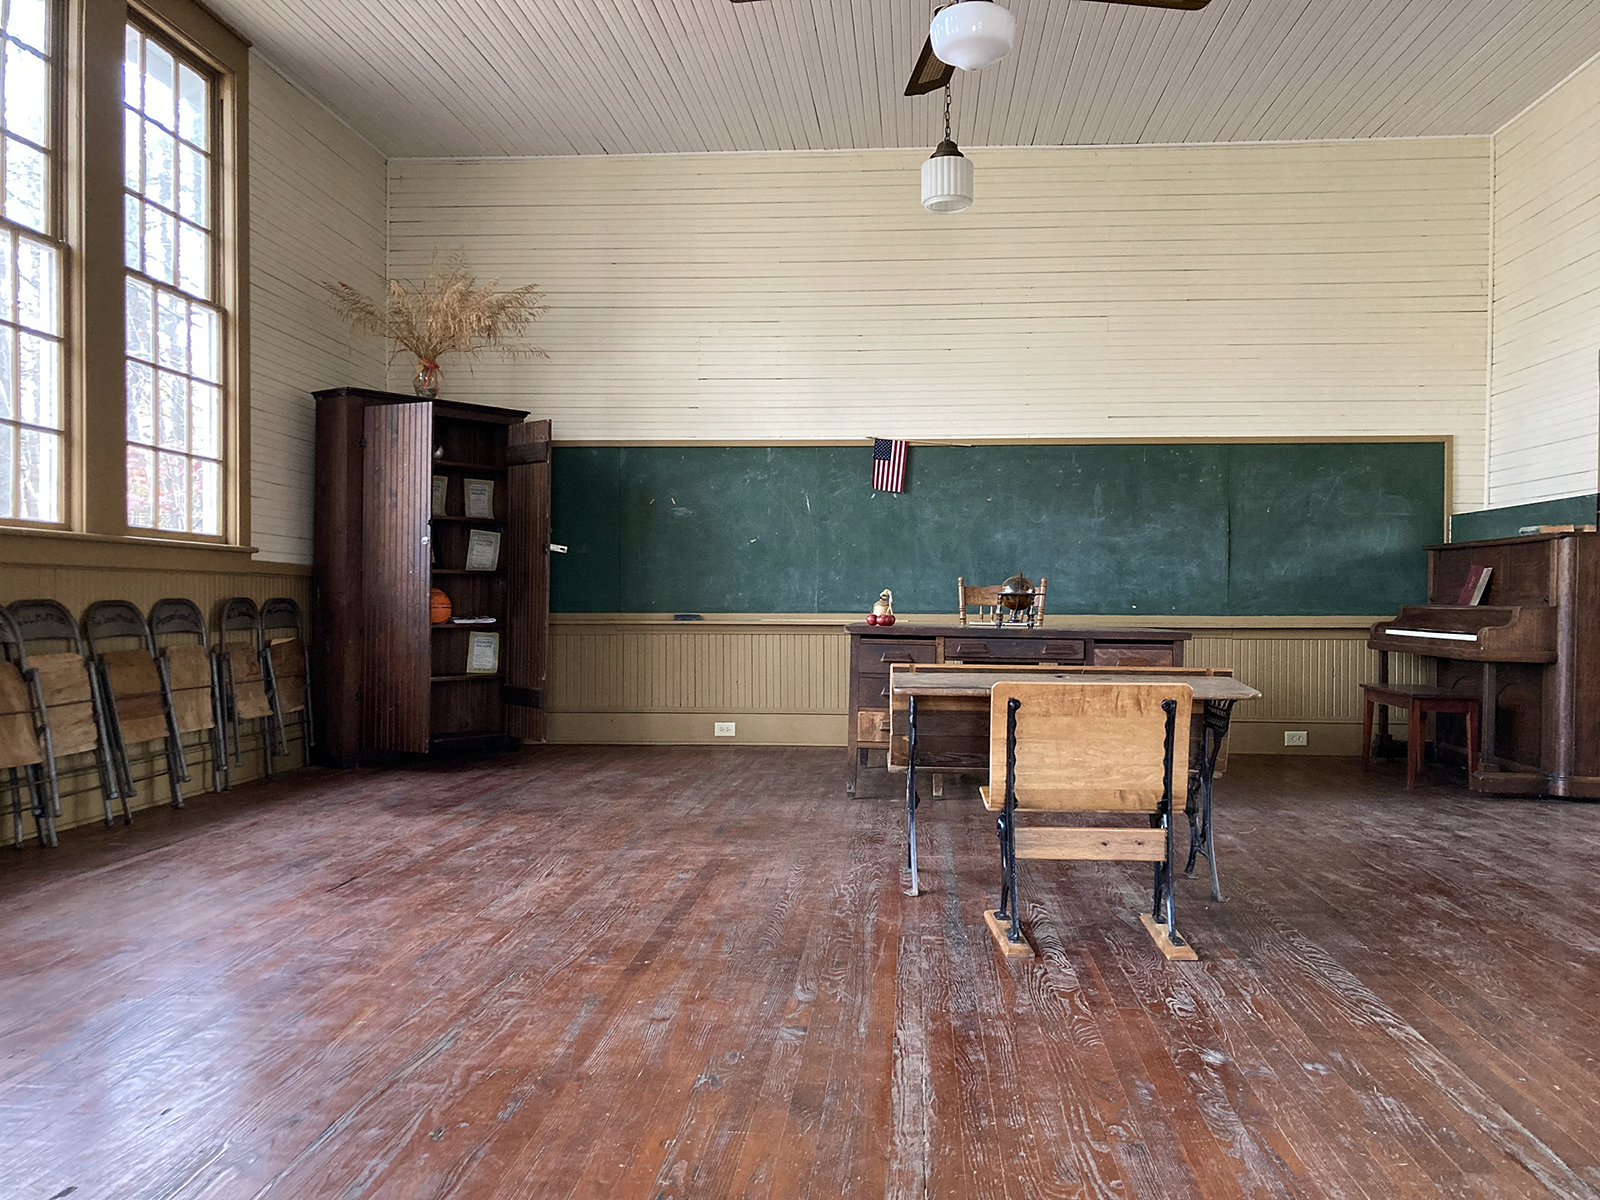 Durham’s Russell School has been lovingly preserved and includes an original desk and chalkboard. The school was one of 17 Rosenwald Schools in Durham County, and 787 across North Carolina, that served Black children. Schools like this one were constructed in 15 states between 1912 and 1932 with funding by Sears executive Julius Rosenwald. RNS photo by Yonat Shimron